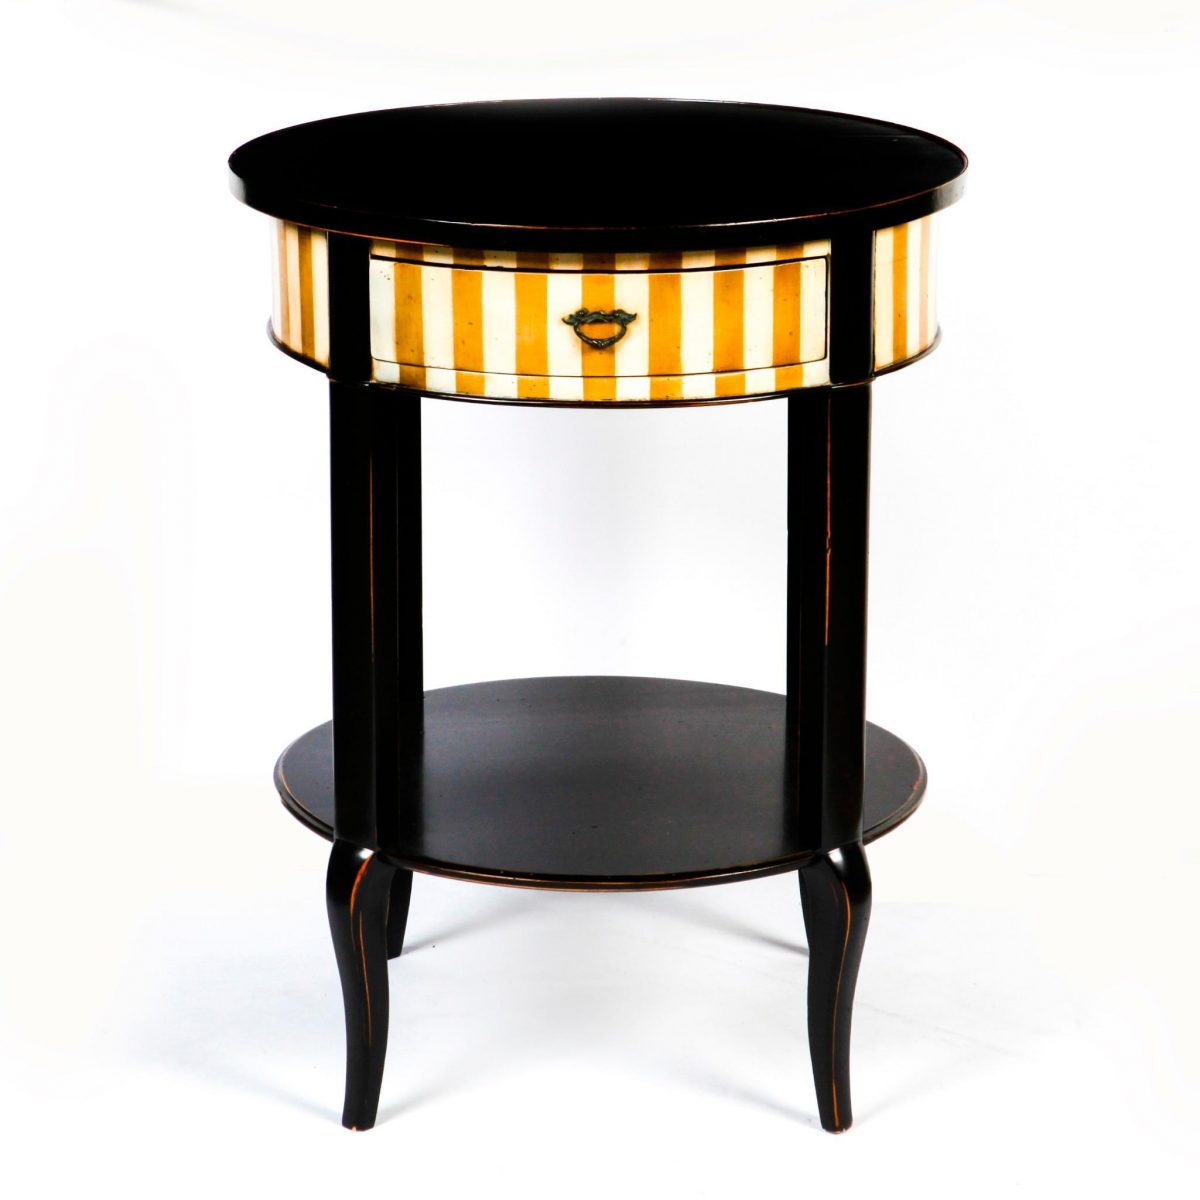 A round end table with dark finish and white and gold vertical stripes.